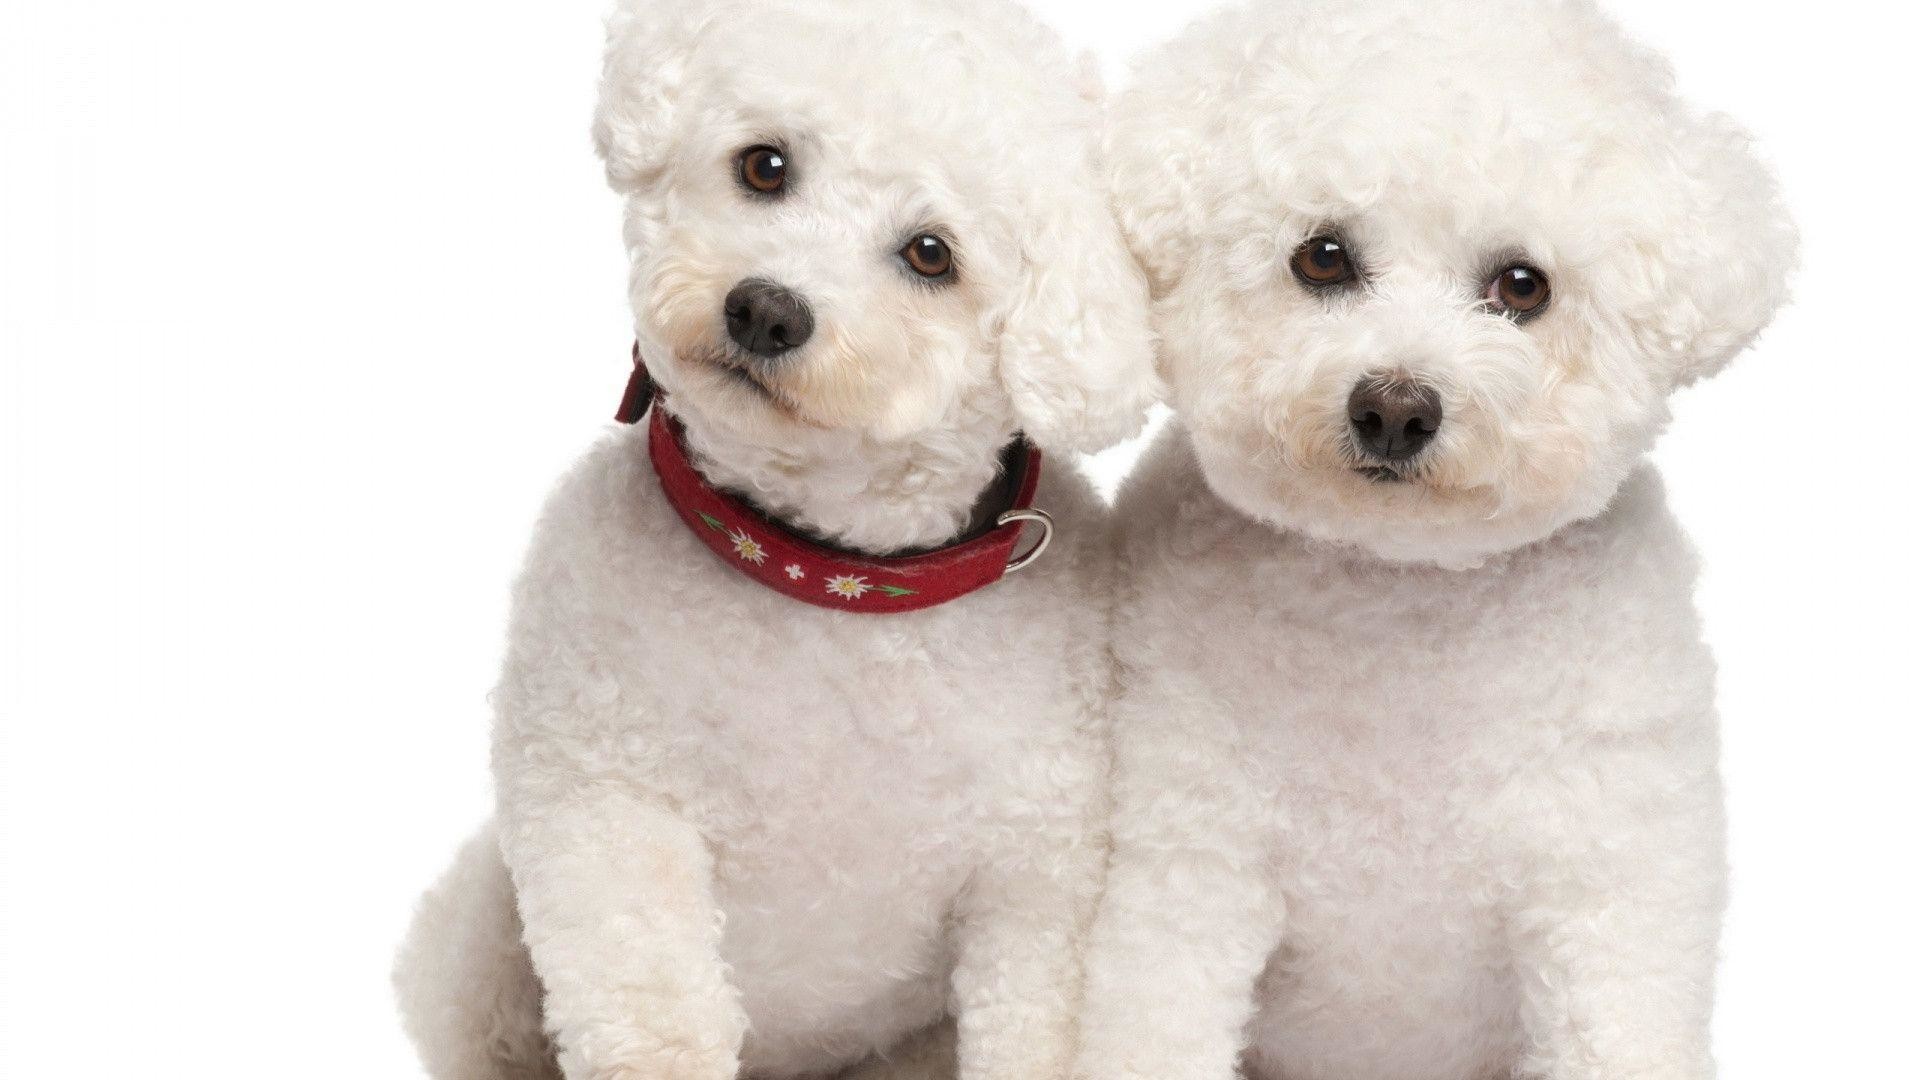 1920x1080 Poodle Dog Wallpapers | Poodle Dog Pictures | Cool Wallpapers